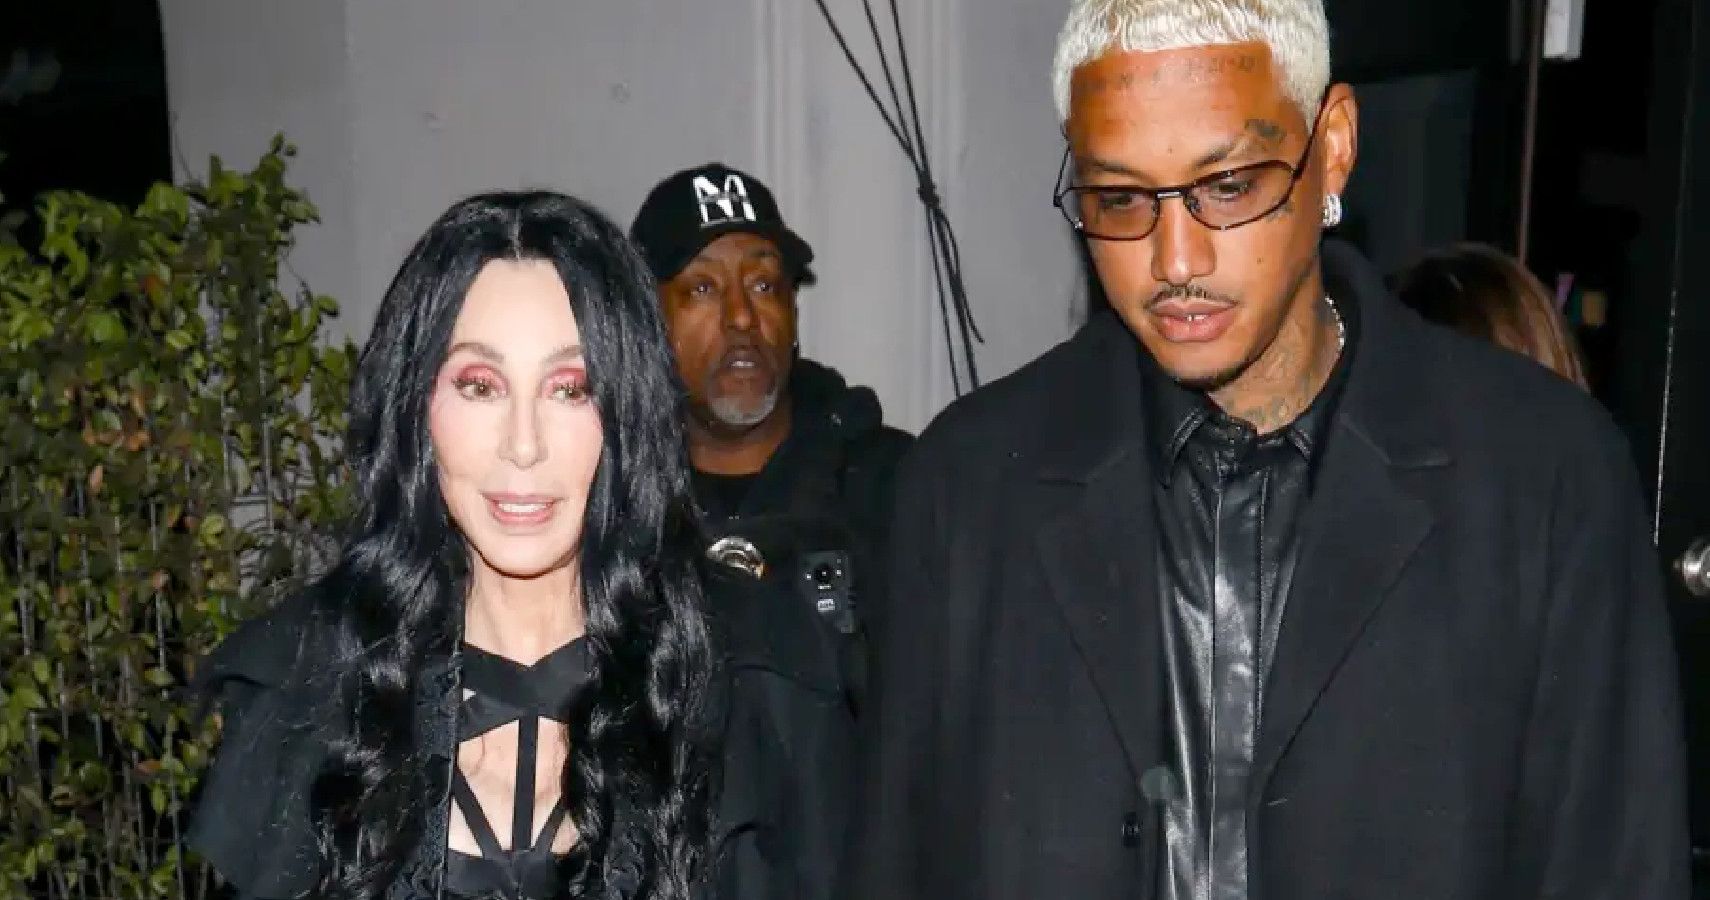 Engaged? Cher Receives Massive Diamond From AE Edwards